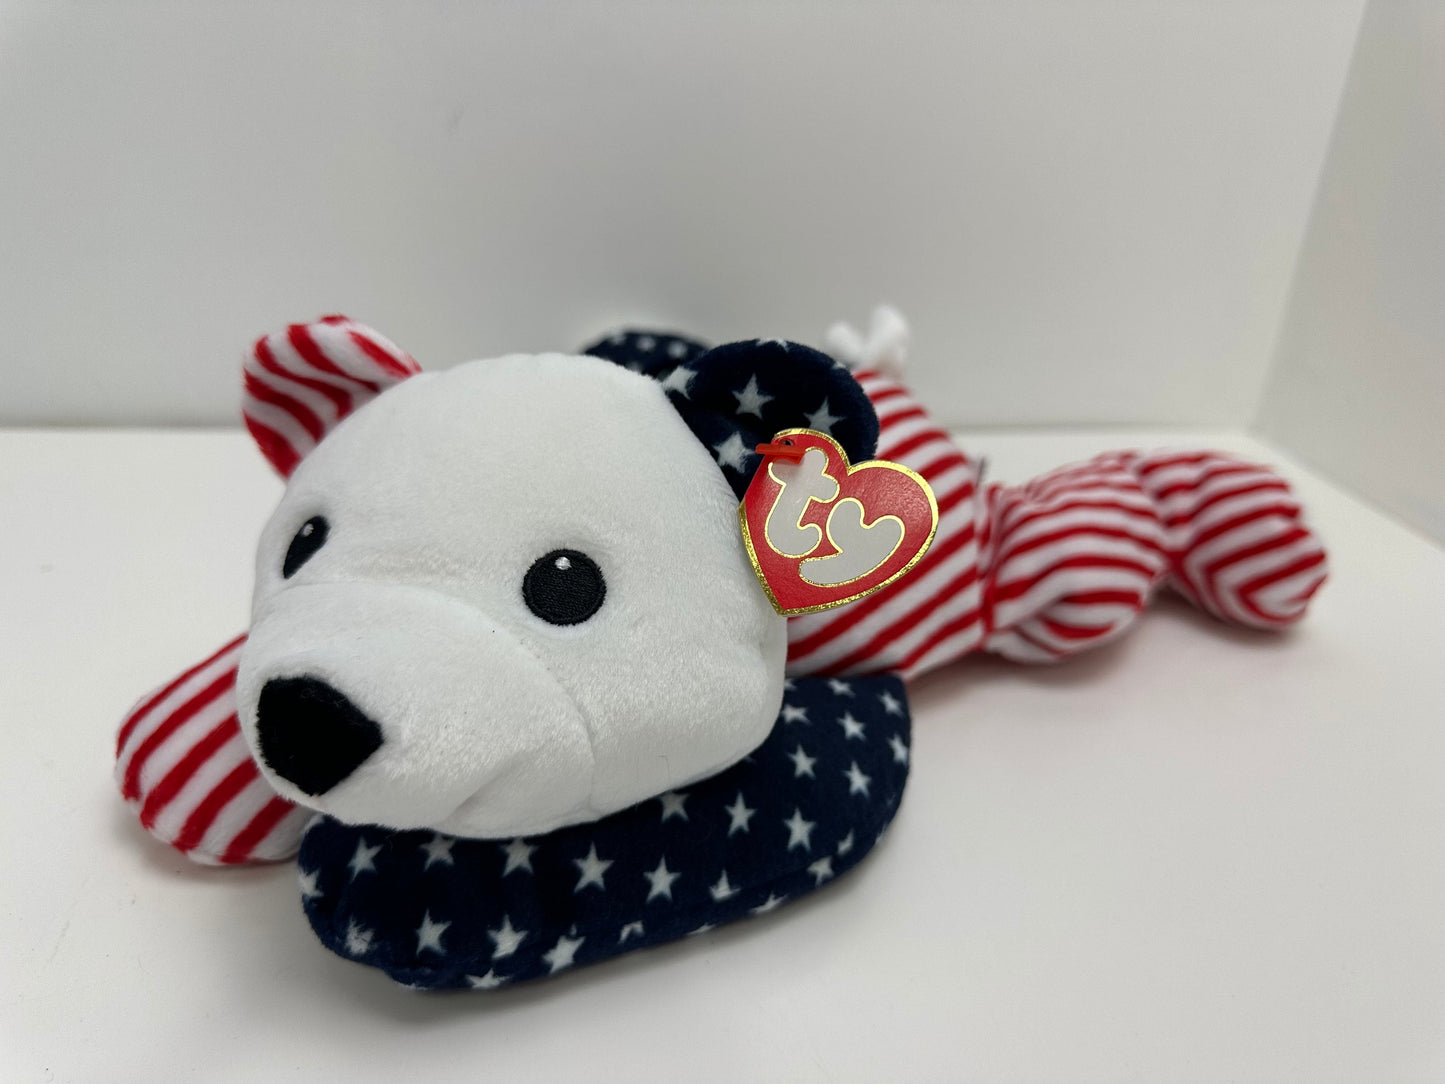 Ty Pillow Pal “Sparkler” the American Bear! (12 inch)